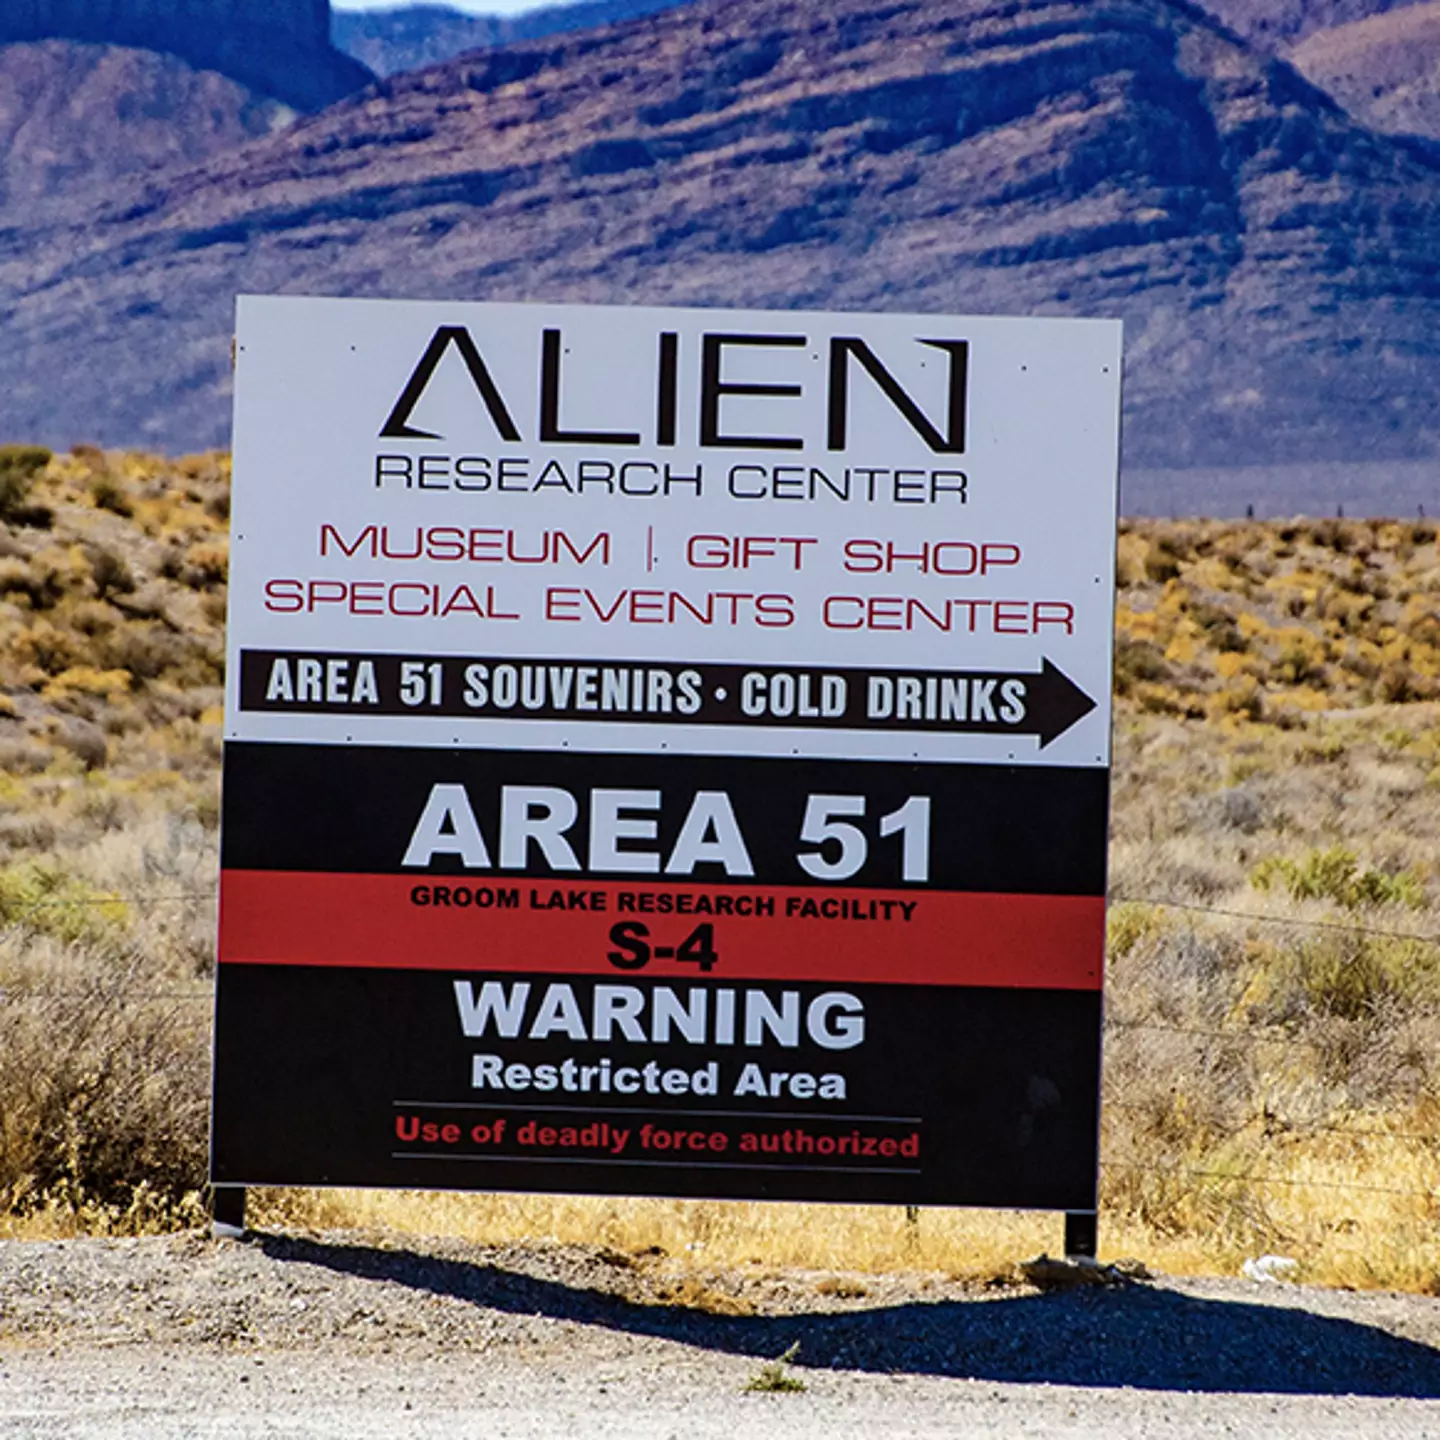 The CIA has confirmed what Area 51 is actually used for